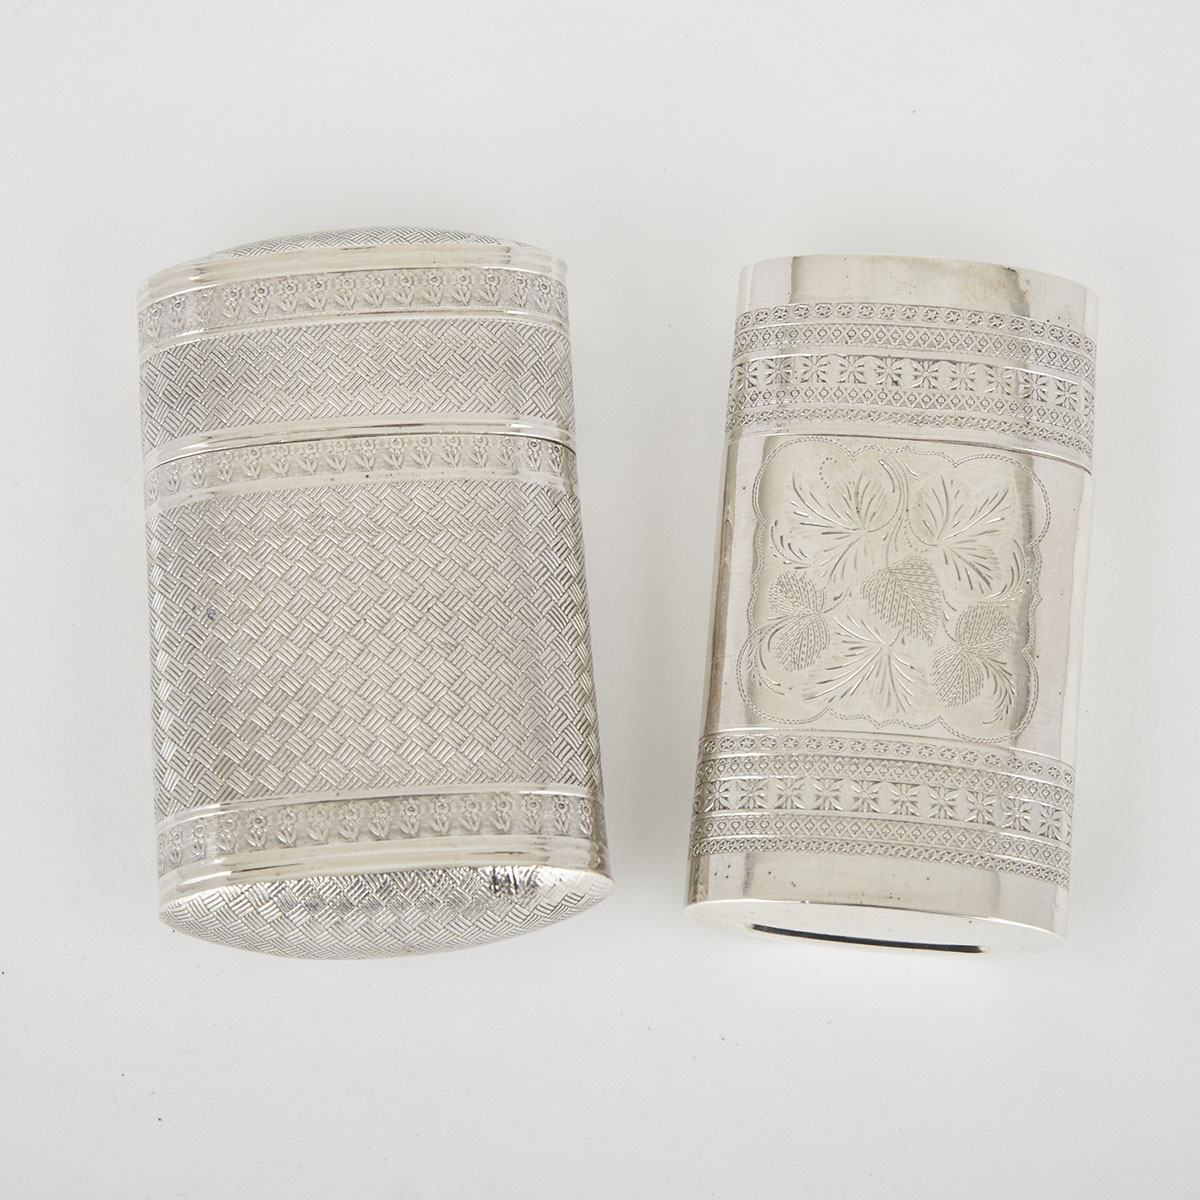 Two Silver Cigar Cases, late 19th century